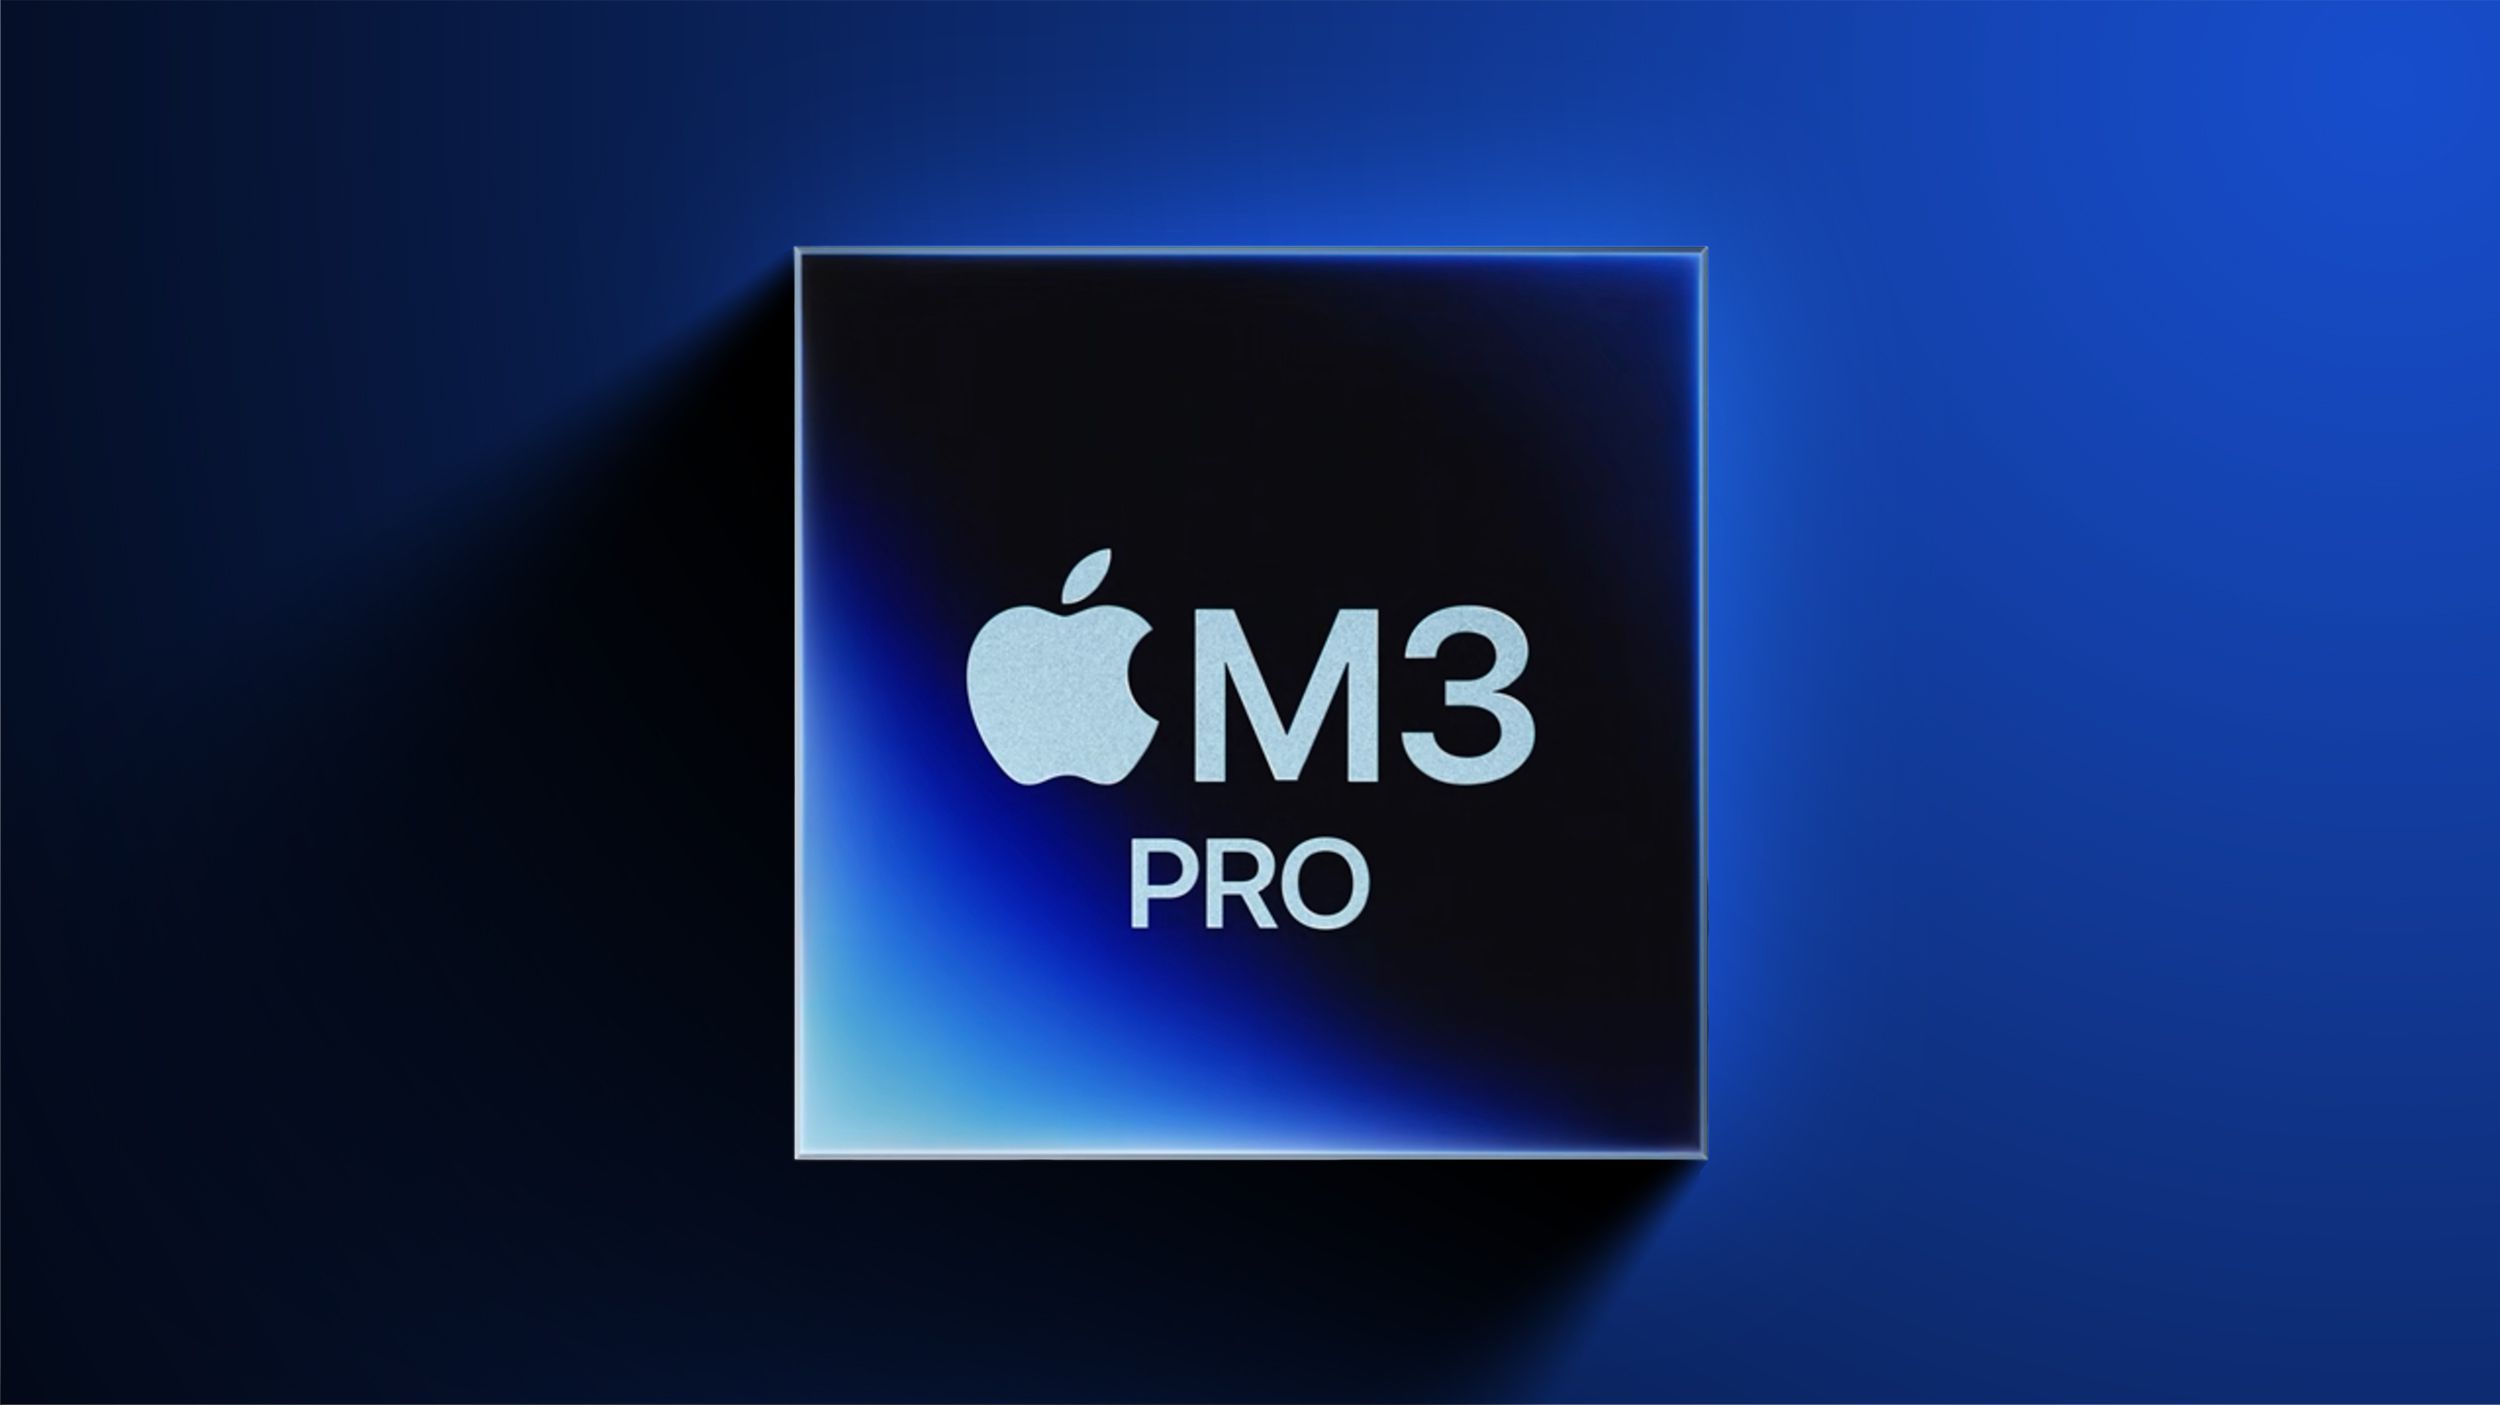 M3 Pro Chip Barely Faster Than M2 Pro in Unverified Benchmark Result - macrumors.com